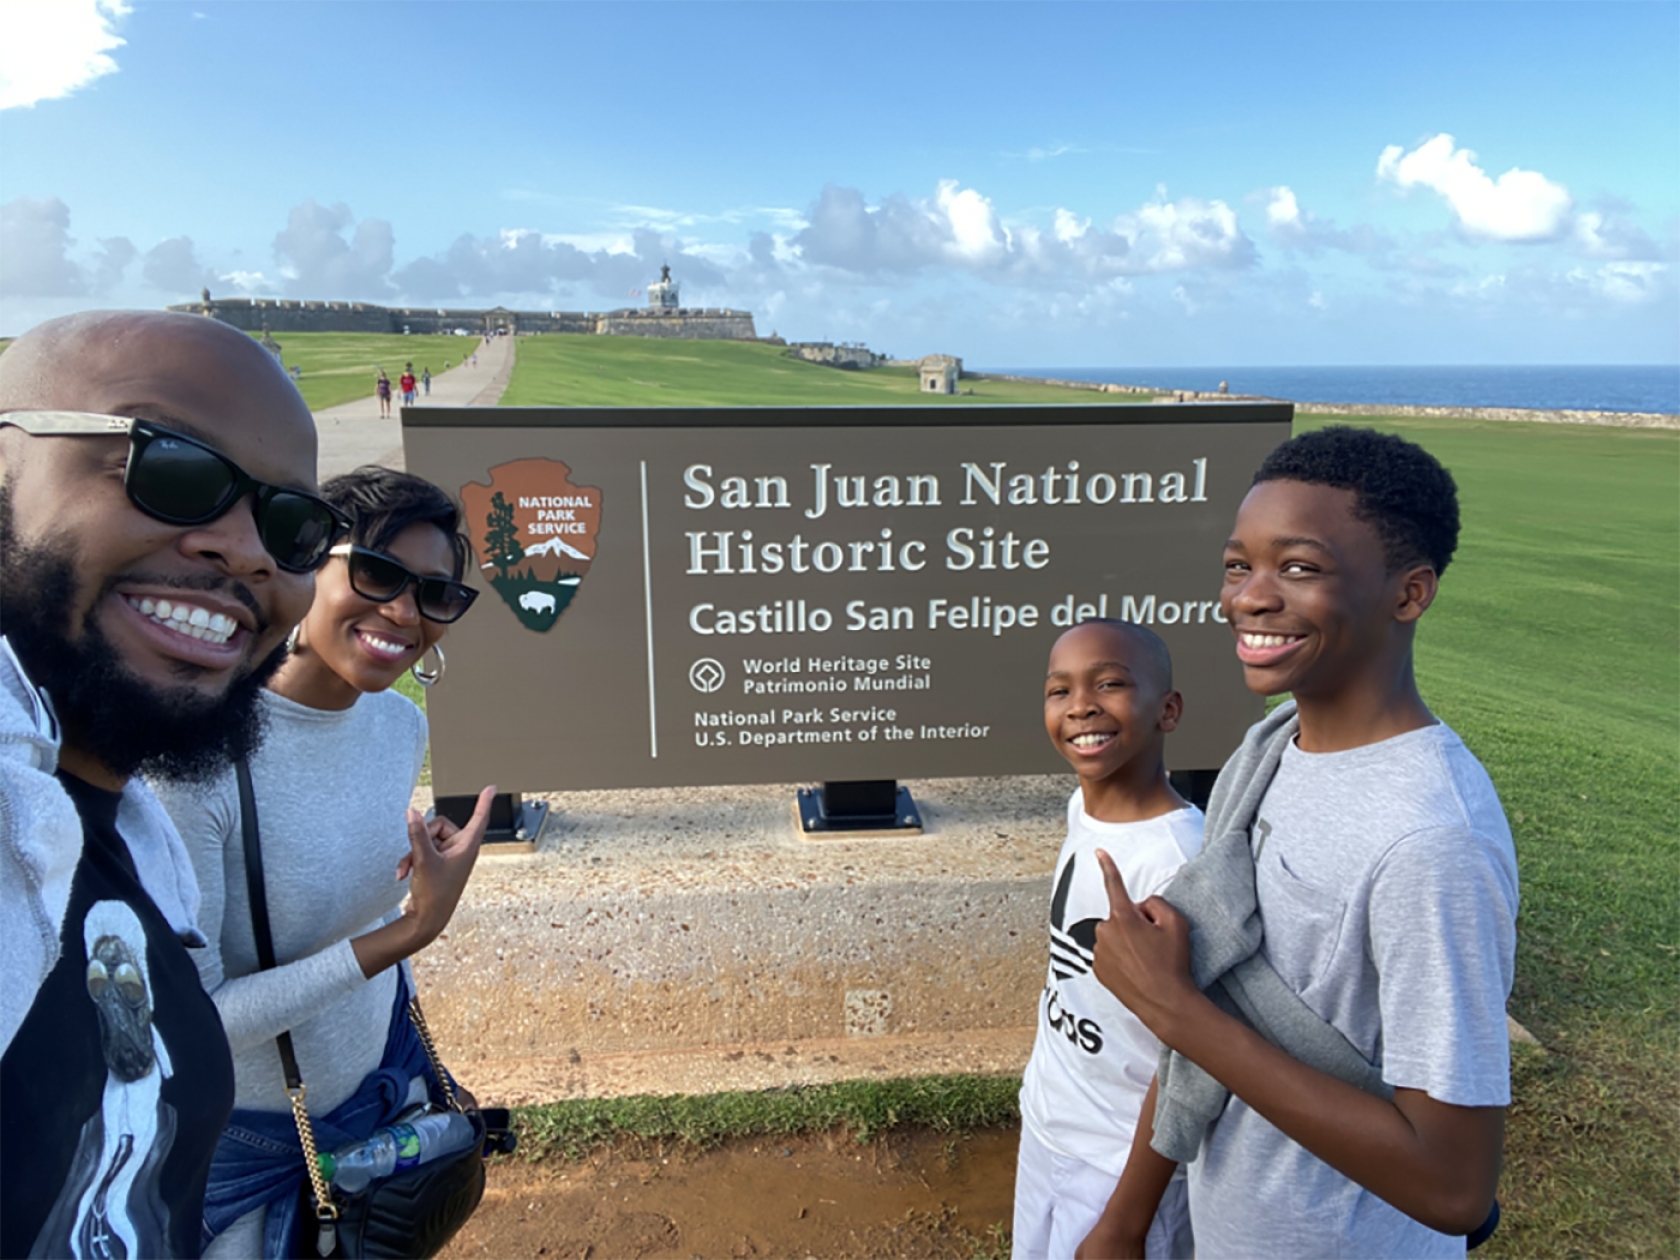 Kev on Stage and his family at San Juan National Historic Site